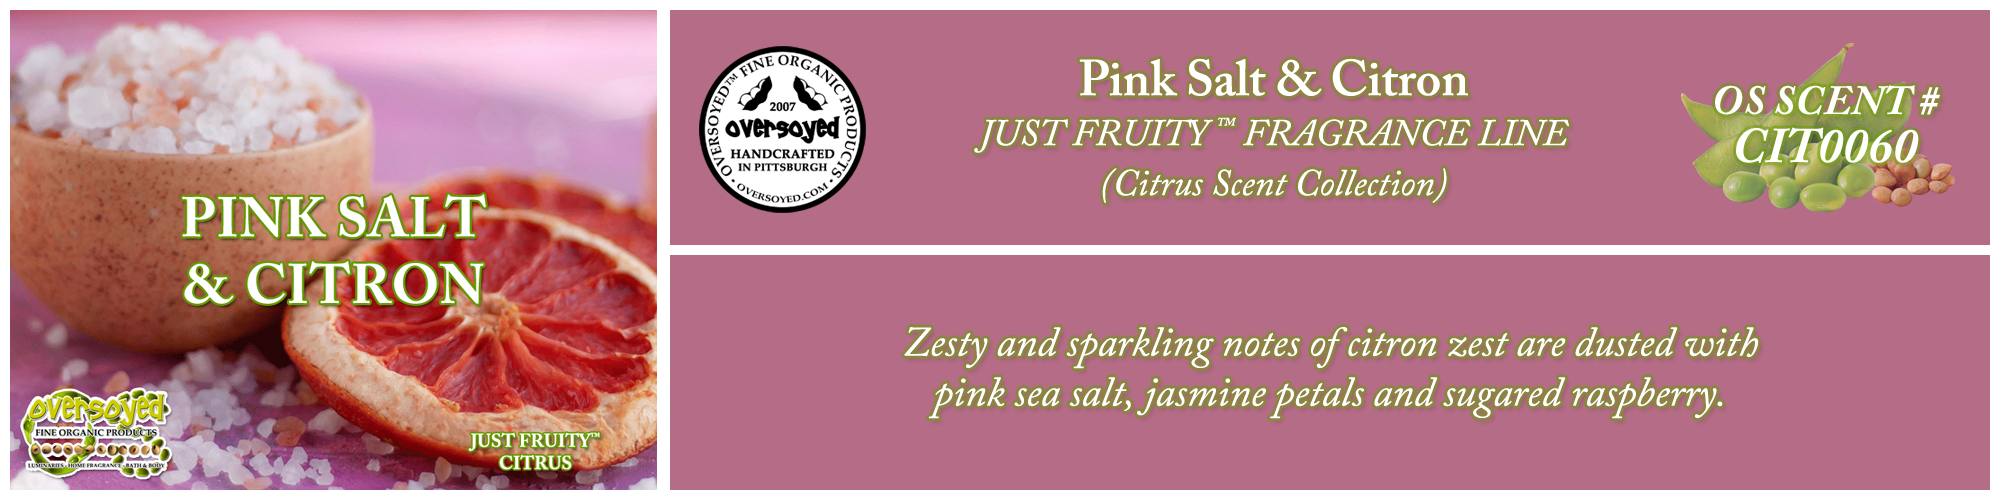 Pink Salt & Citron Handcrafted Products Collection